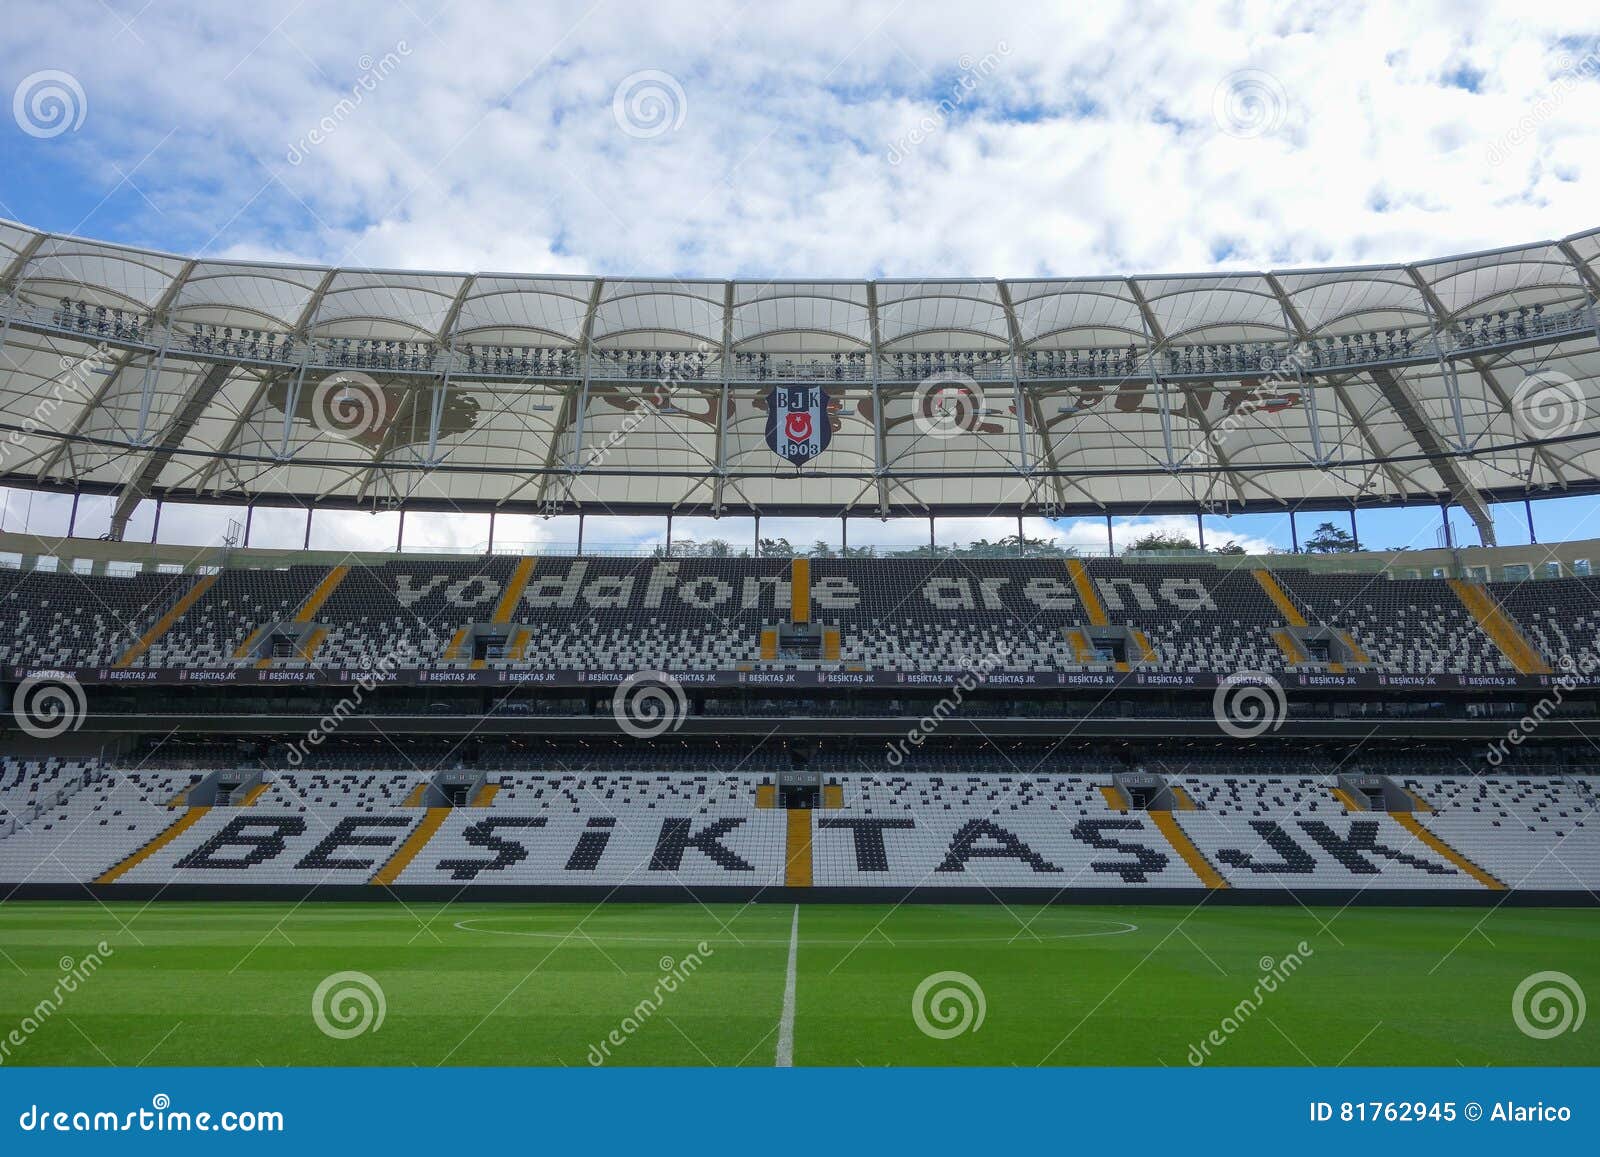 Besiktas Vodafone Arena In Istanbul Editorial Image Image Of Play Town